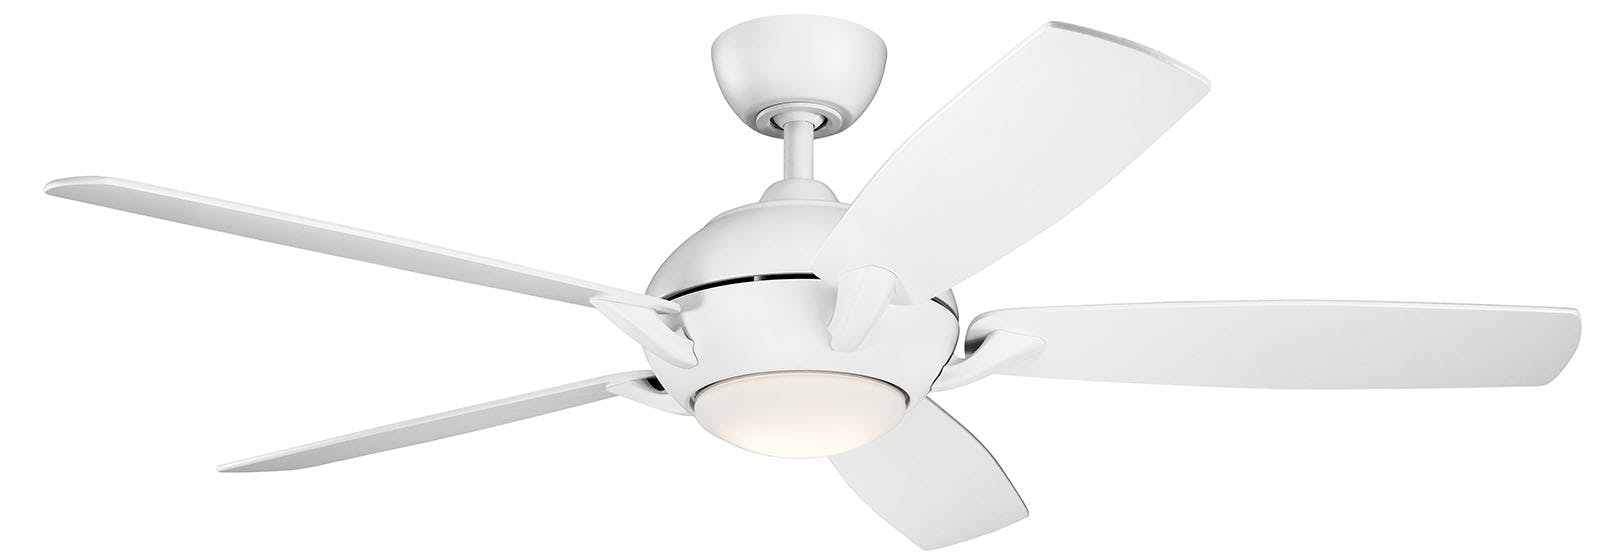 Geno LED 54" Fan in White & White Blades on a white background